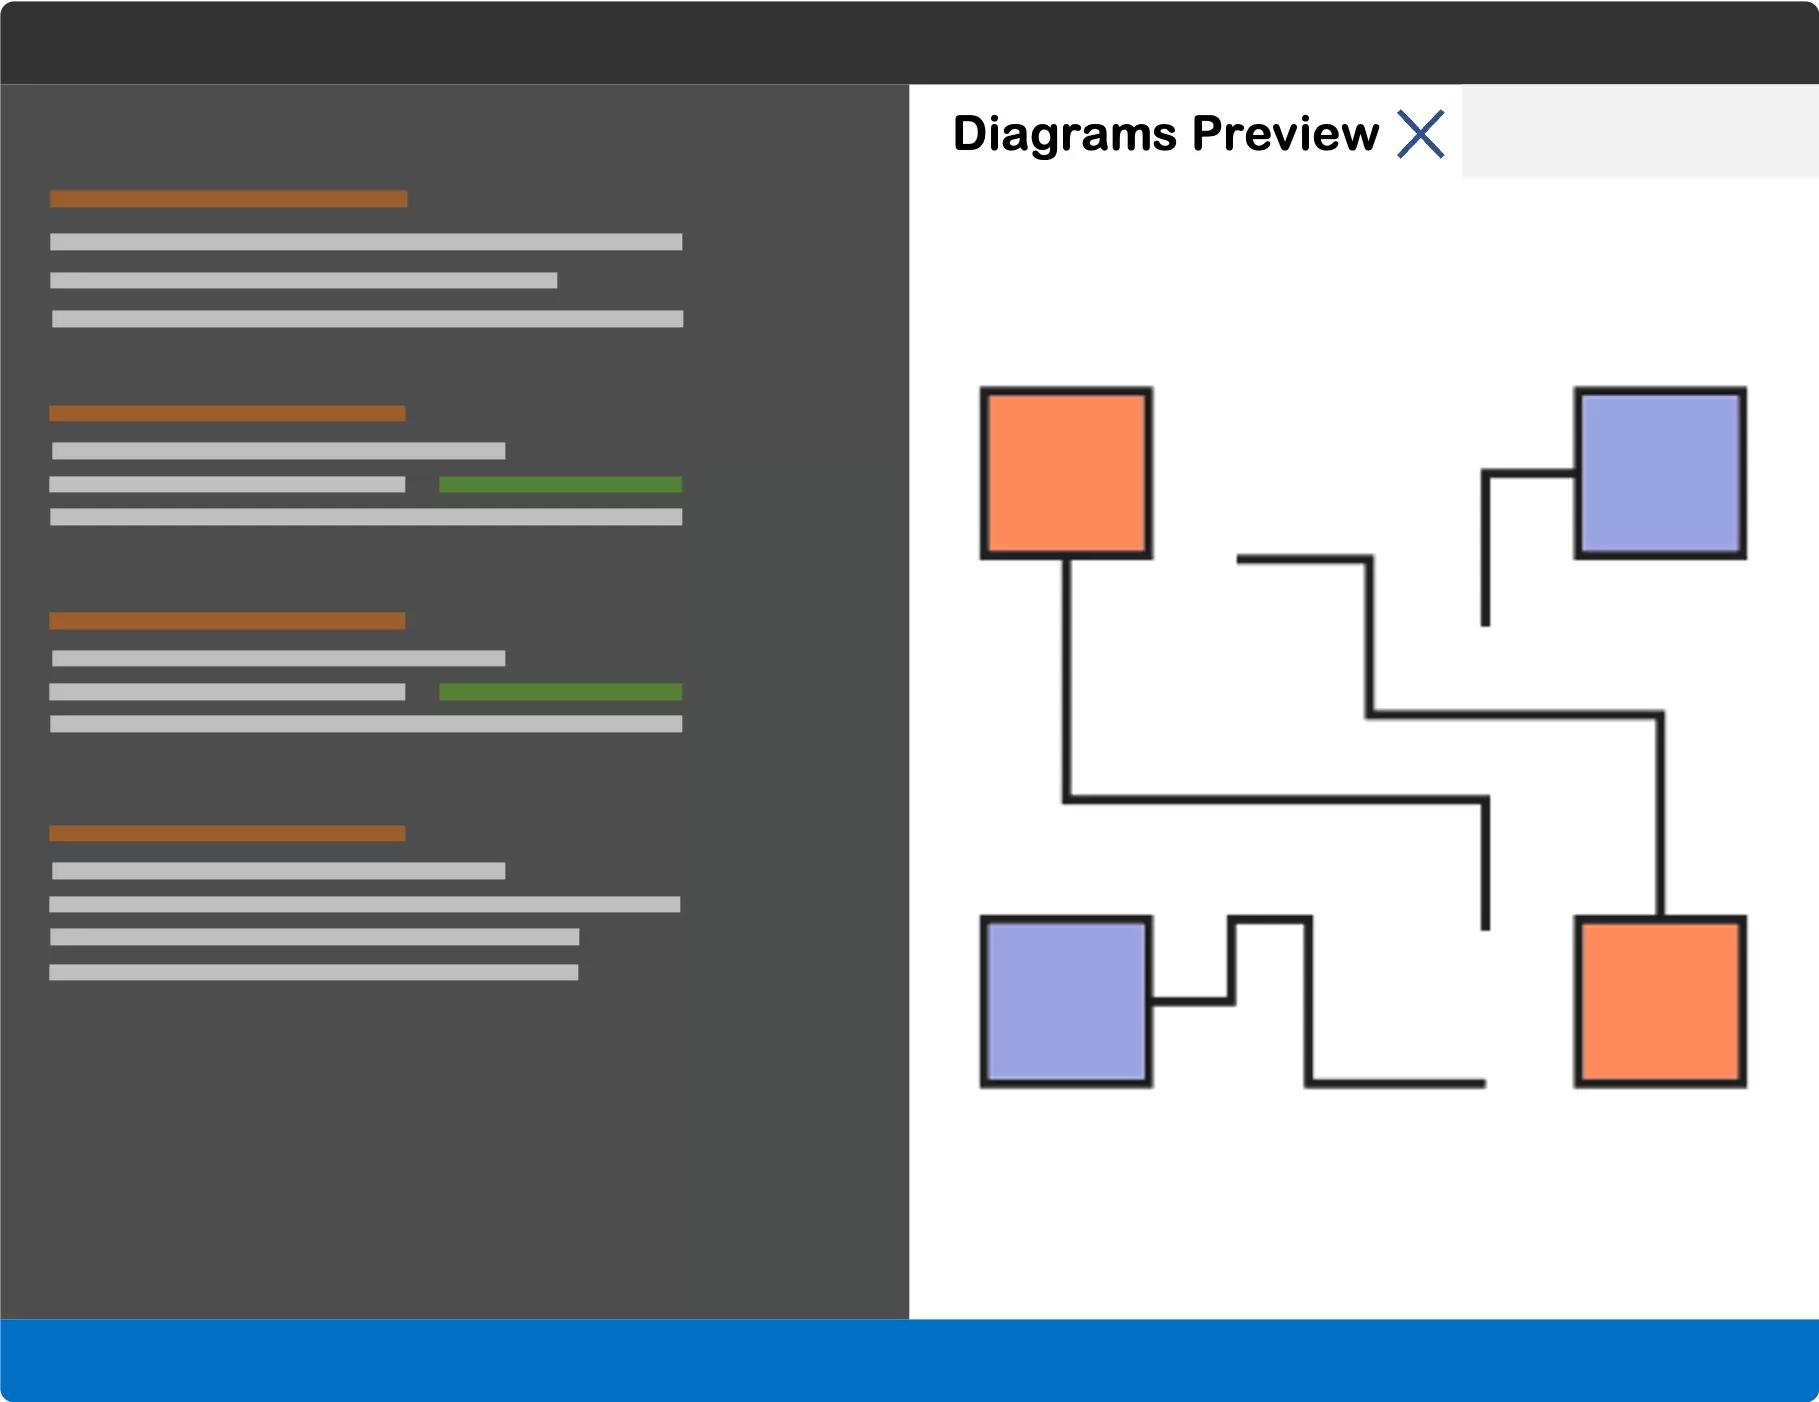 Diagrams Previewer for VSCode